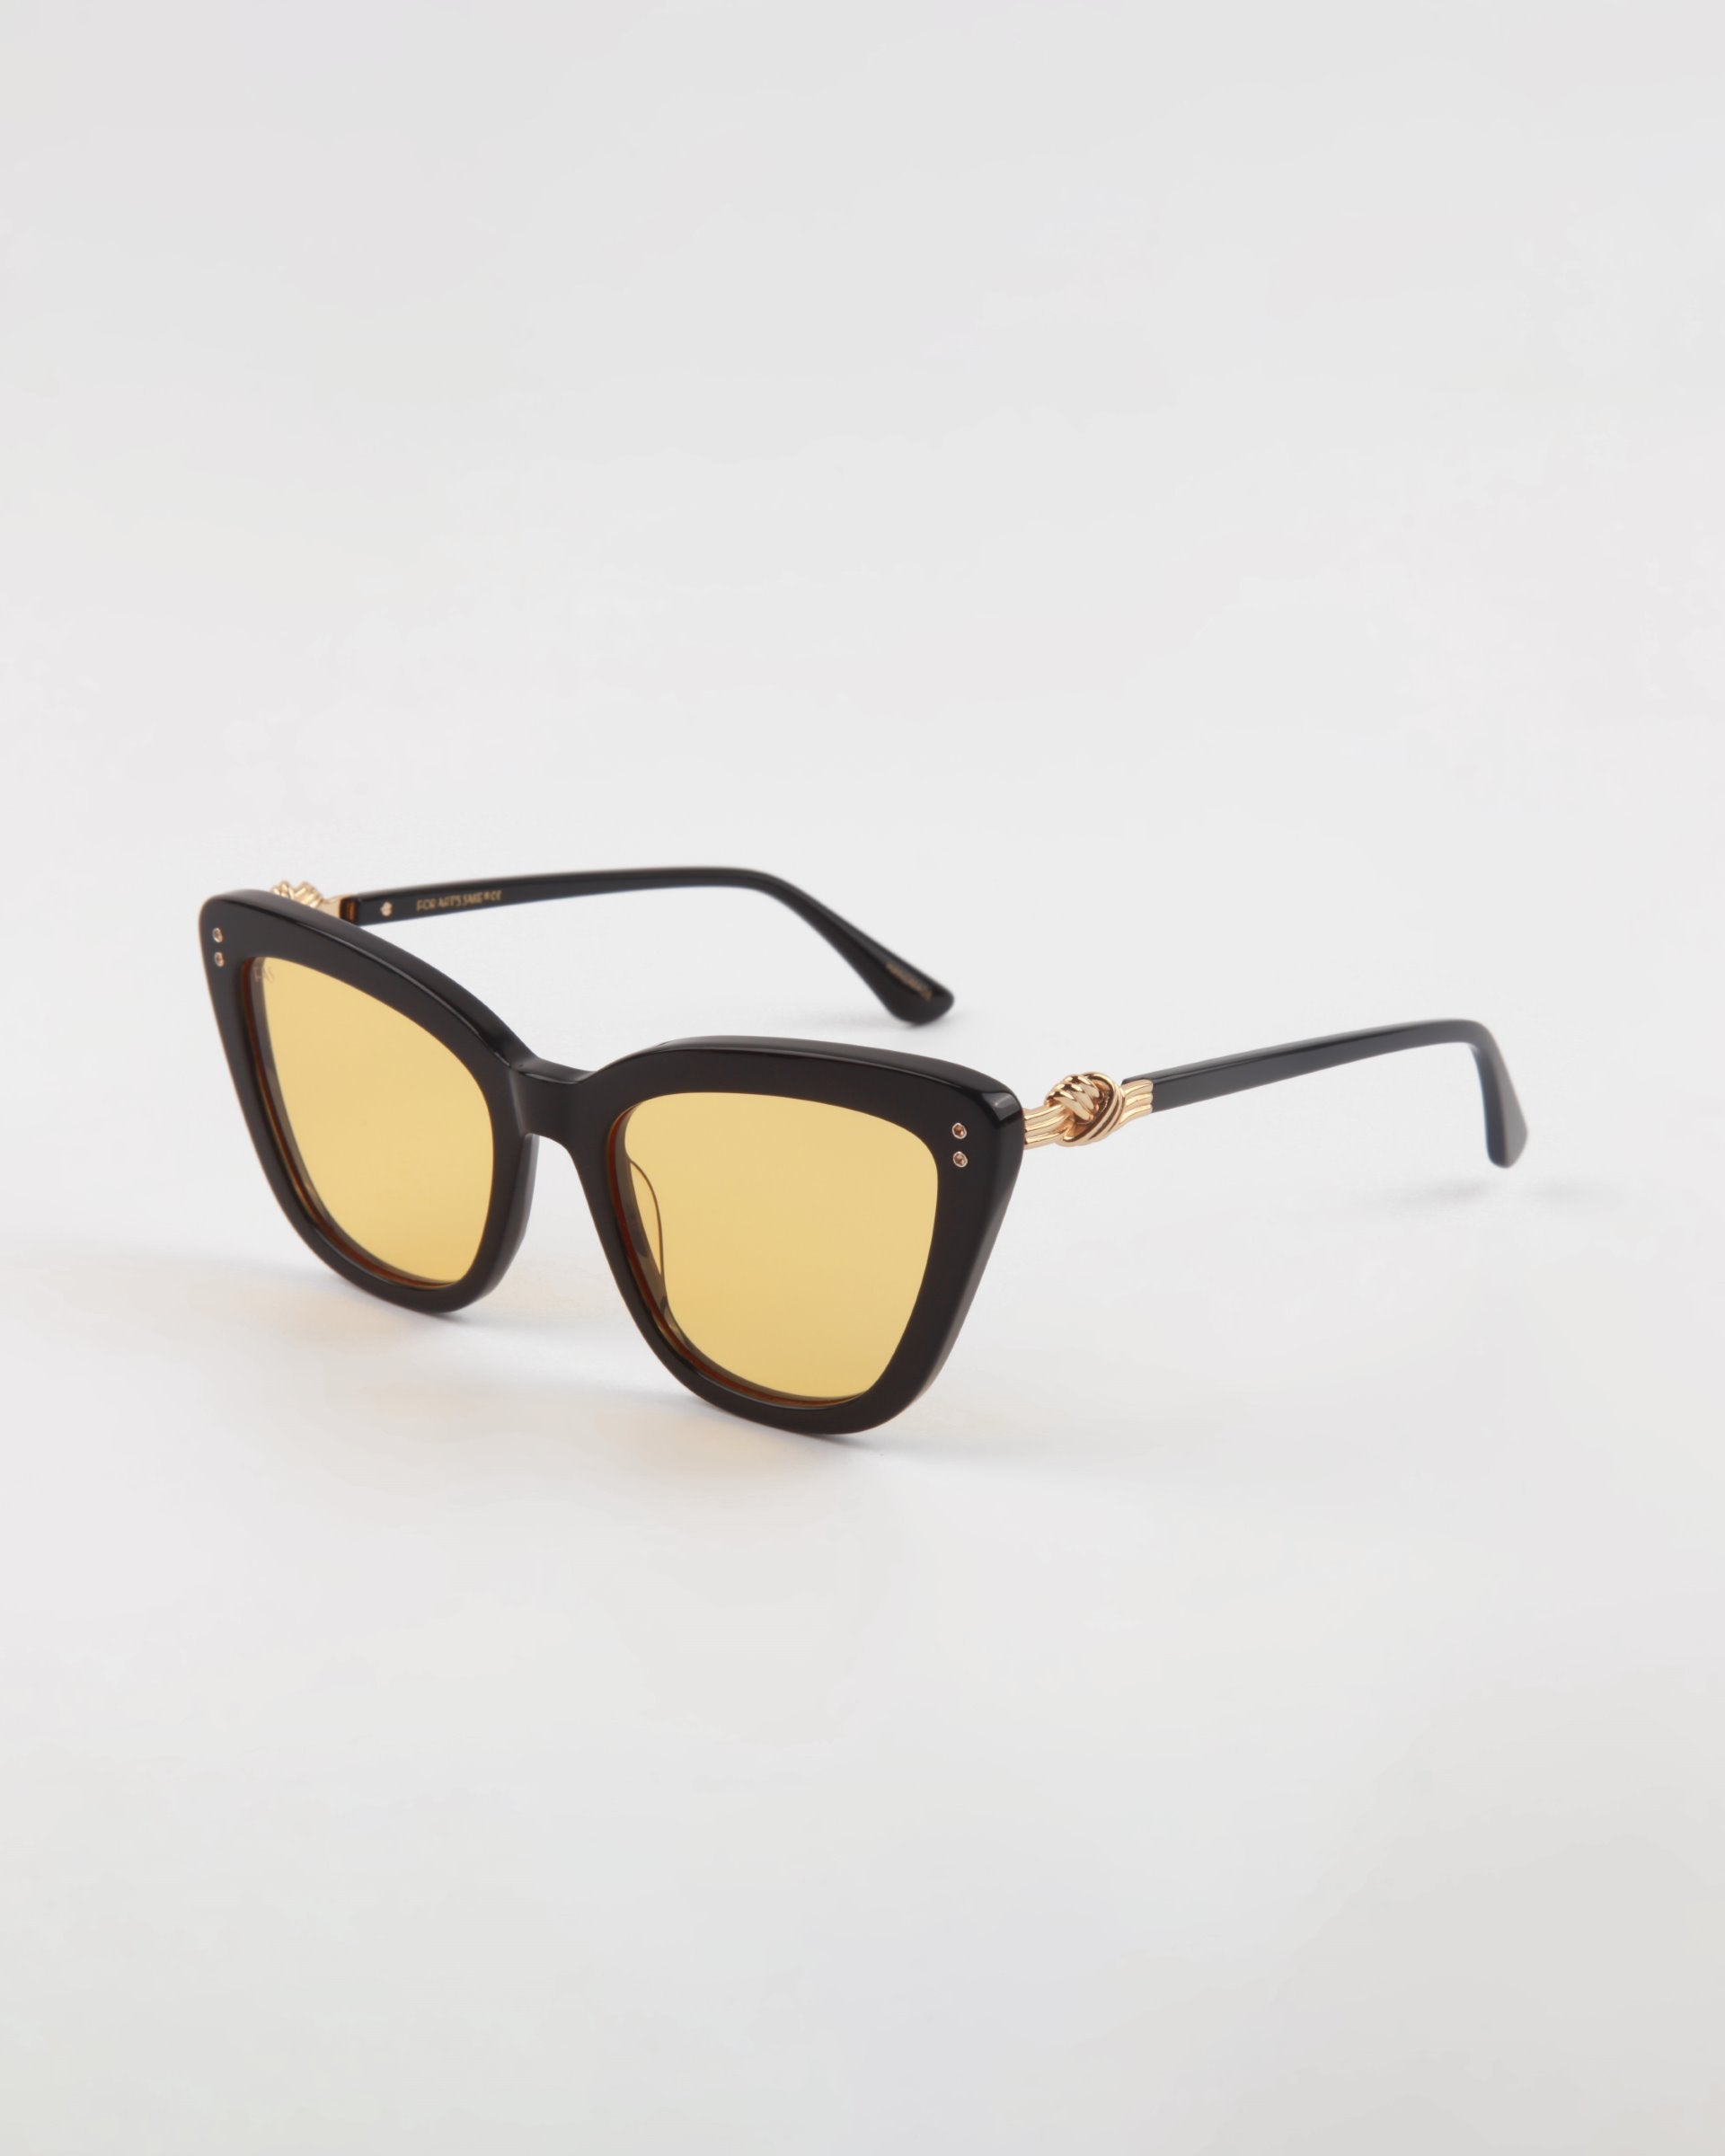 Ice Cream by For Art's Sake® with black handmade acetate cat-eye frames and yellow-tinted lenses. The frames feature gold decorative elements on the hinges, providing both style and essential UVA & UVB protection. These chic glasses are elegantly displayed on a minimalist white background.